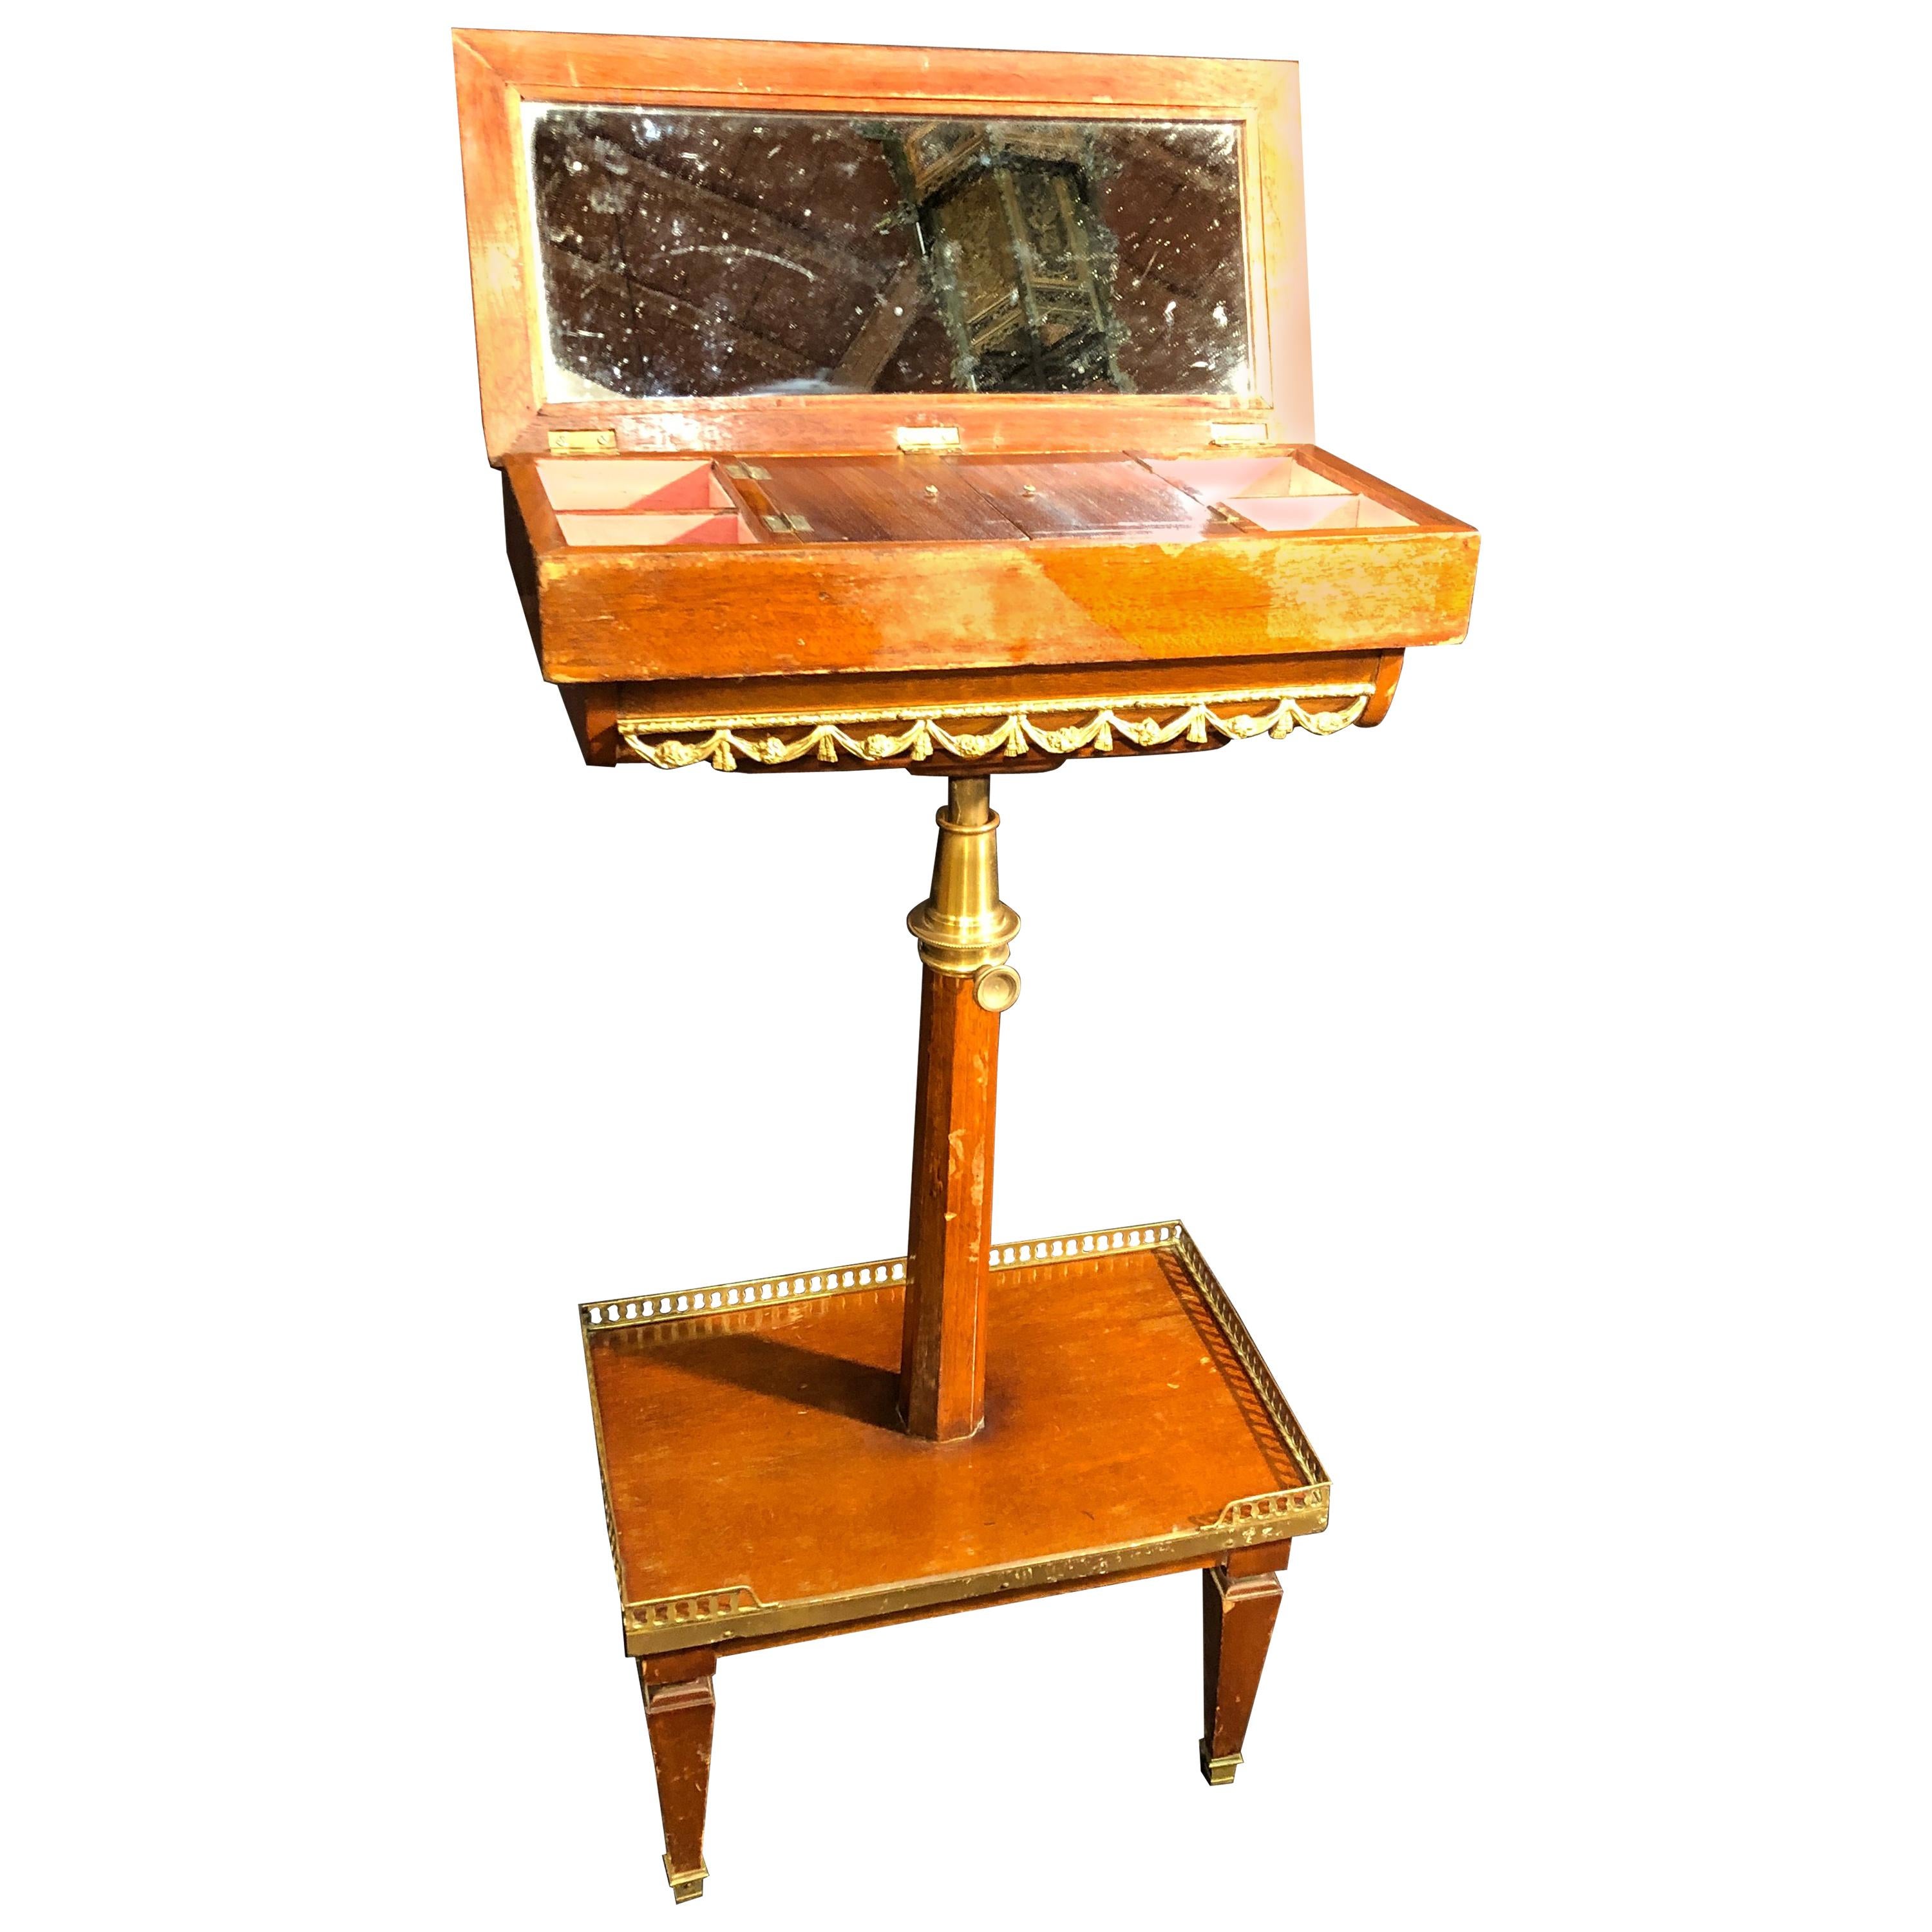 Nice ladies table, inside a well-finished dressing table with fabric and drawers, the central foot is adjustable to different heights. Solid mahogany and finished with golden bronze applications. Louis XVI style but later, late Napoleon III.
In